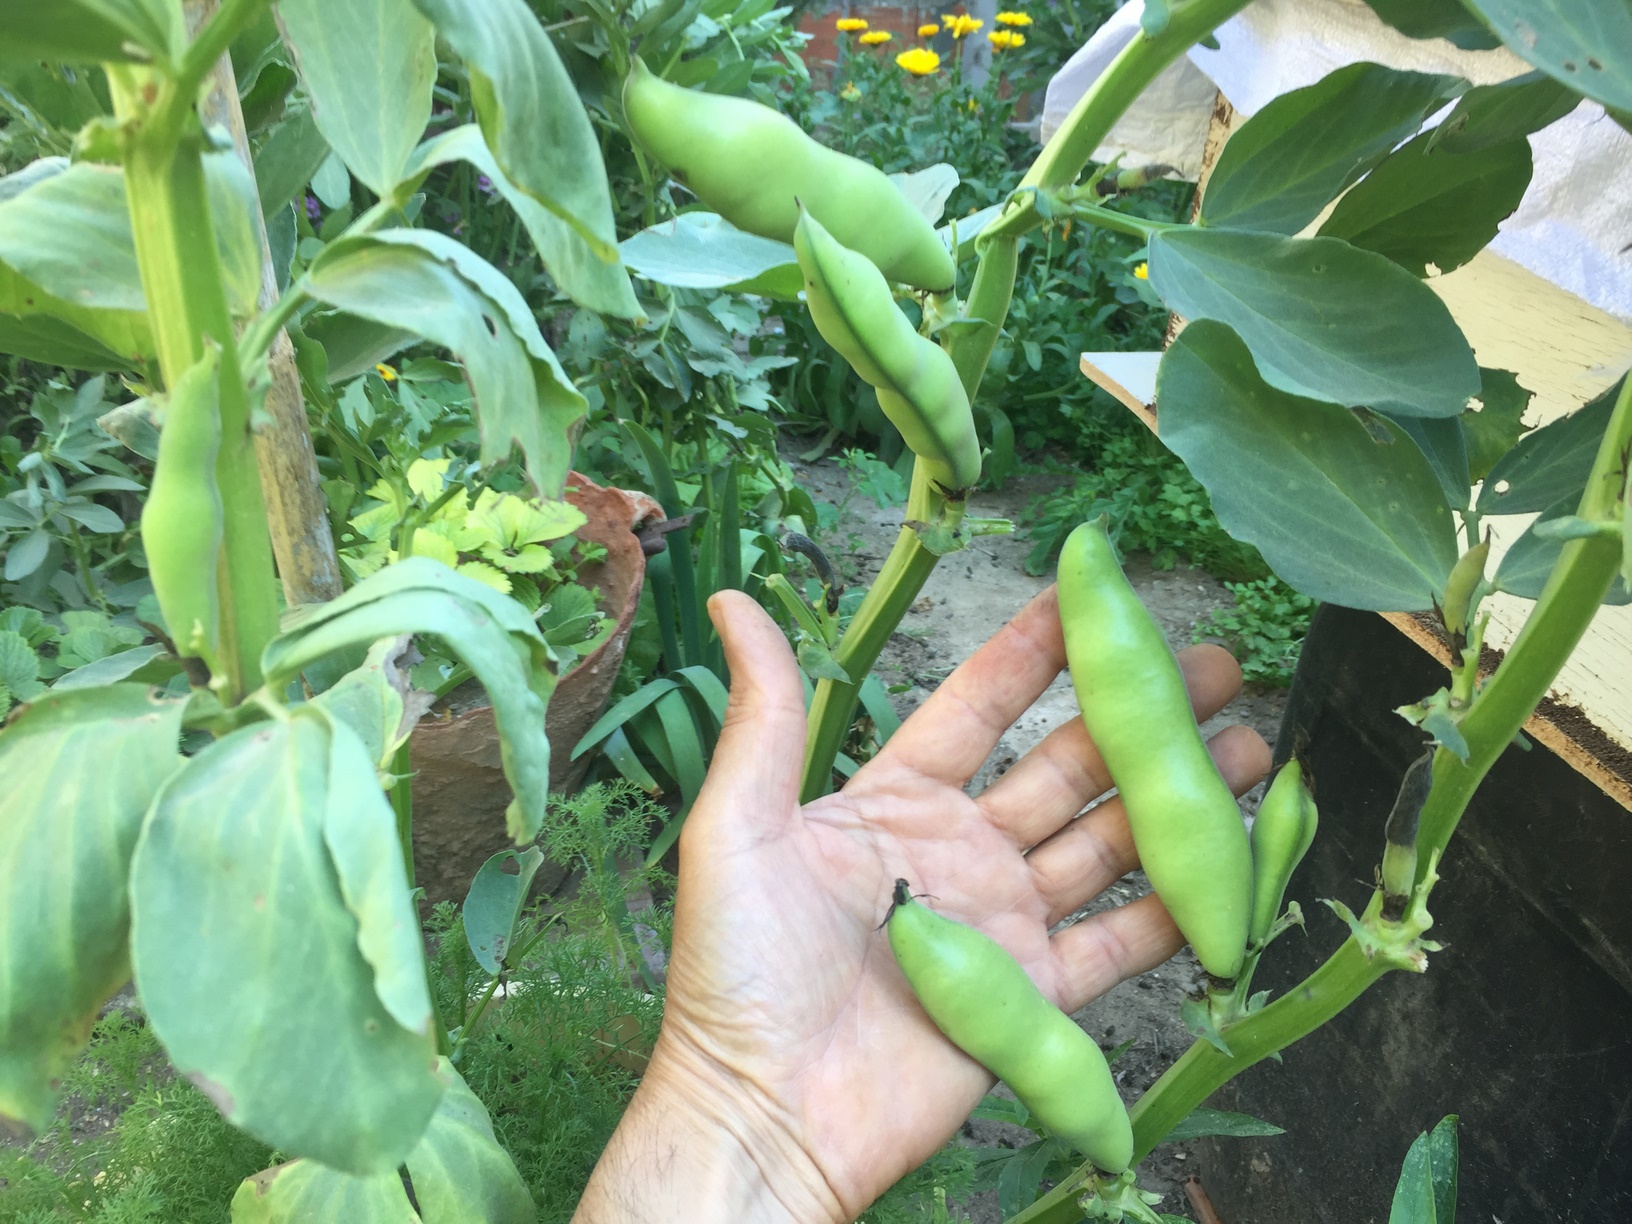 Young broad bean pods can be eaten raw, but if you want to go for a more bitter tasting bean, wait until they mature.